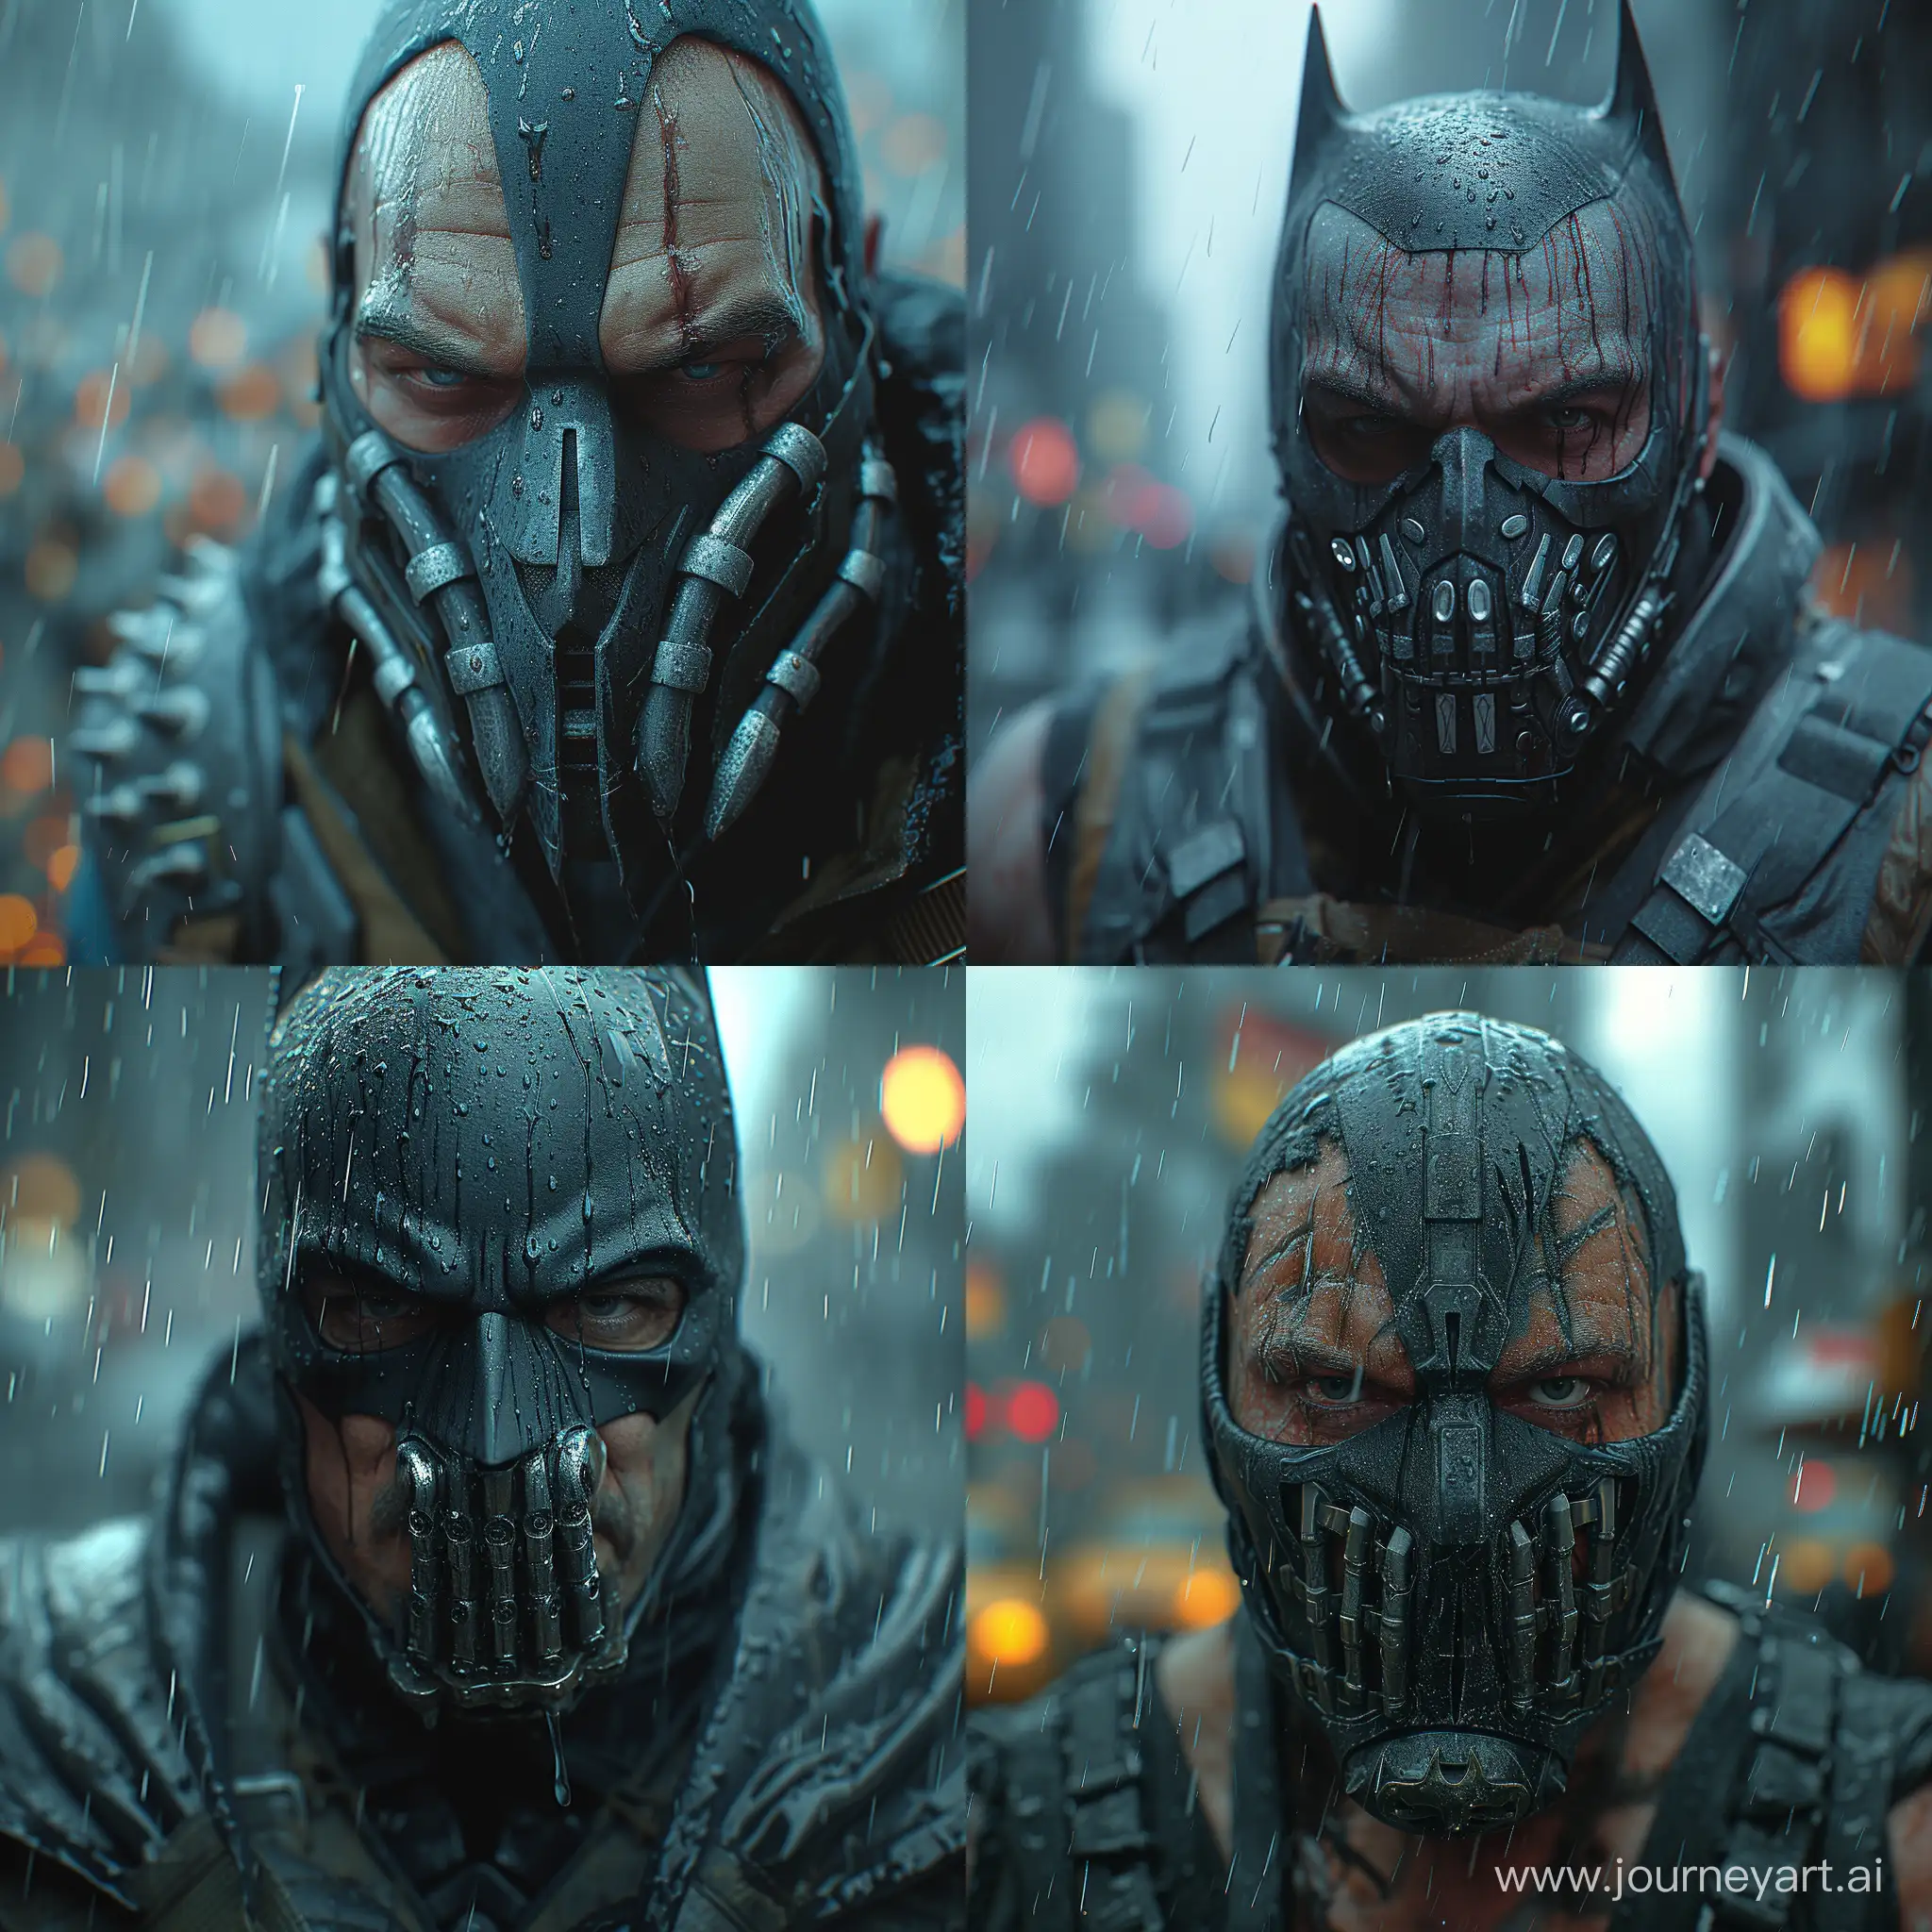 Create a realistic and dynamic image of Bane in Gotham City, with a close-up depth of field, set in the rain. The image should capture the essence of Gotham City's atmosphere and Bane's character, incorporating a stylized approach. Pay attention to detail and realism, and ensure that the image conveys a sense of drama and intrigue no batman --stylize 750 --v 6